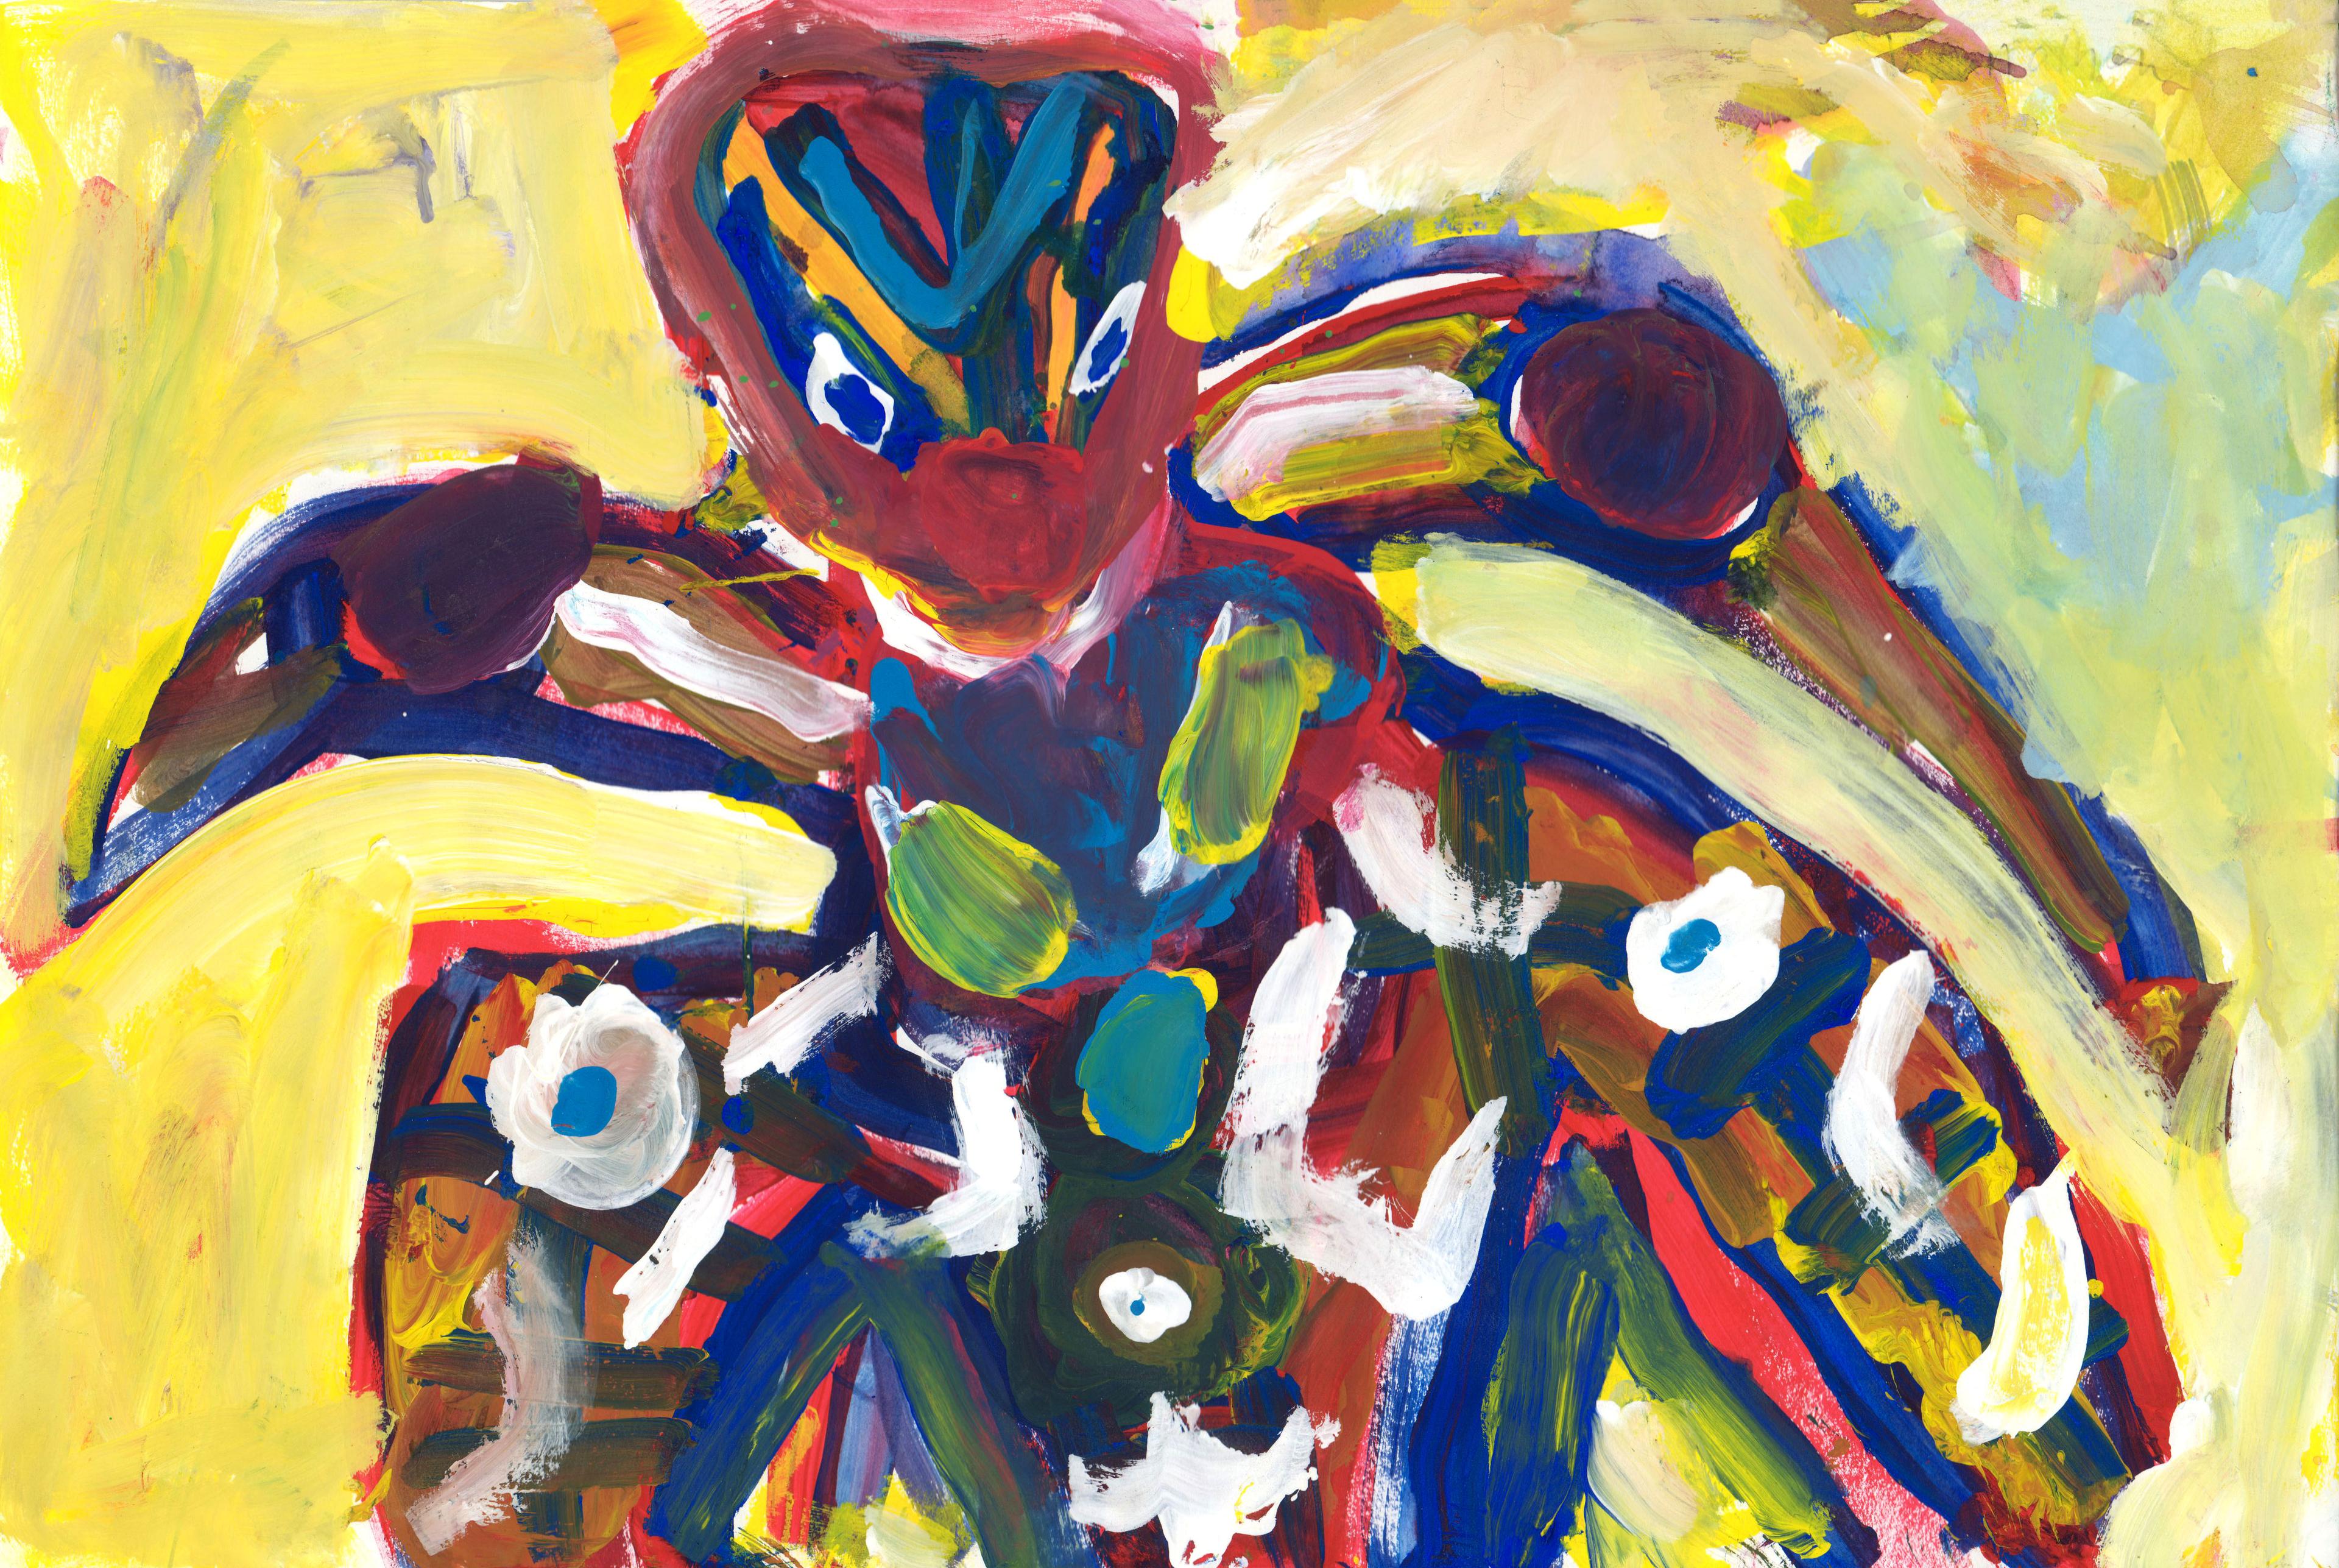 Tempera abstract painting of the superhero Ninja Spiderman. The figure appears crouched in the center of the image with his arms spread left and right. His head is gazing downward and slightly to the right. Ninja Spiderman is composed of thick, abstract swaths of blue, white, black, and red paint. Two white eyes with blue pupils are shown on the figure's face. A yellow wash of paint comprises the background.